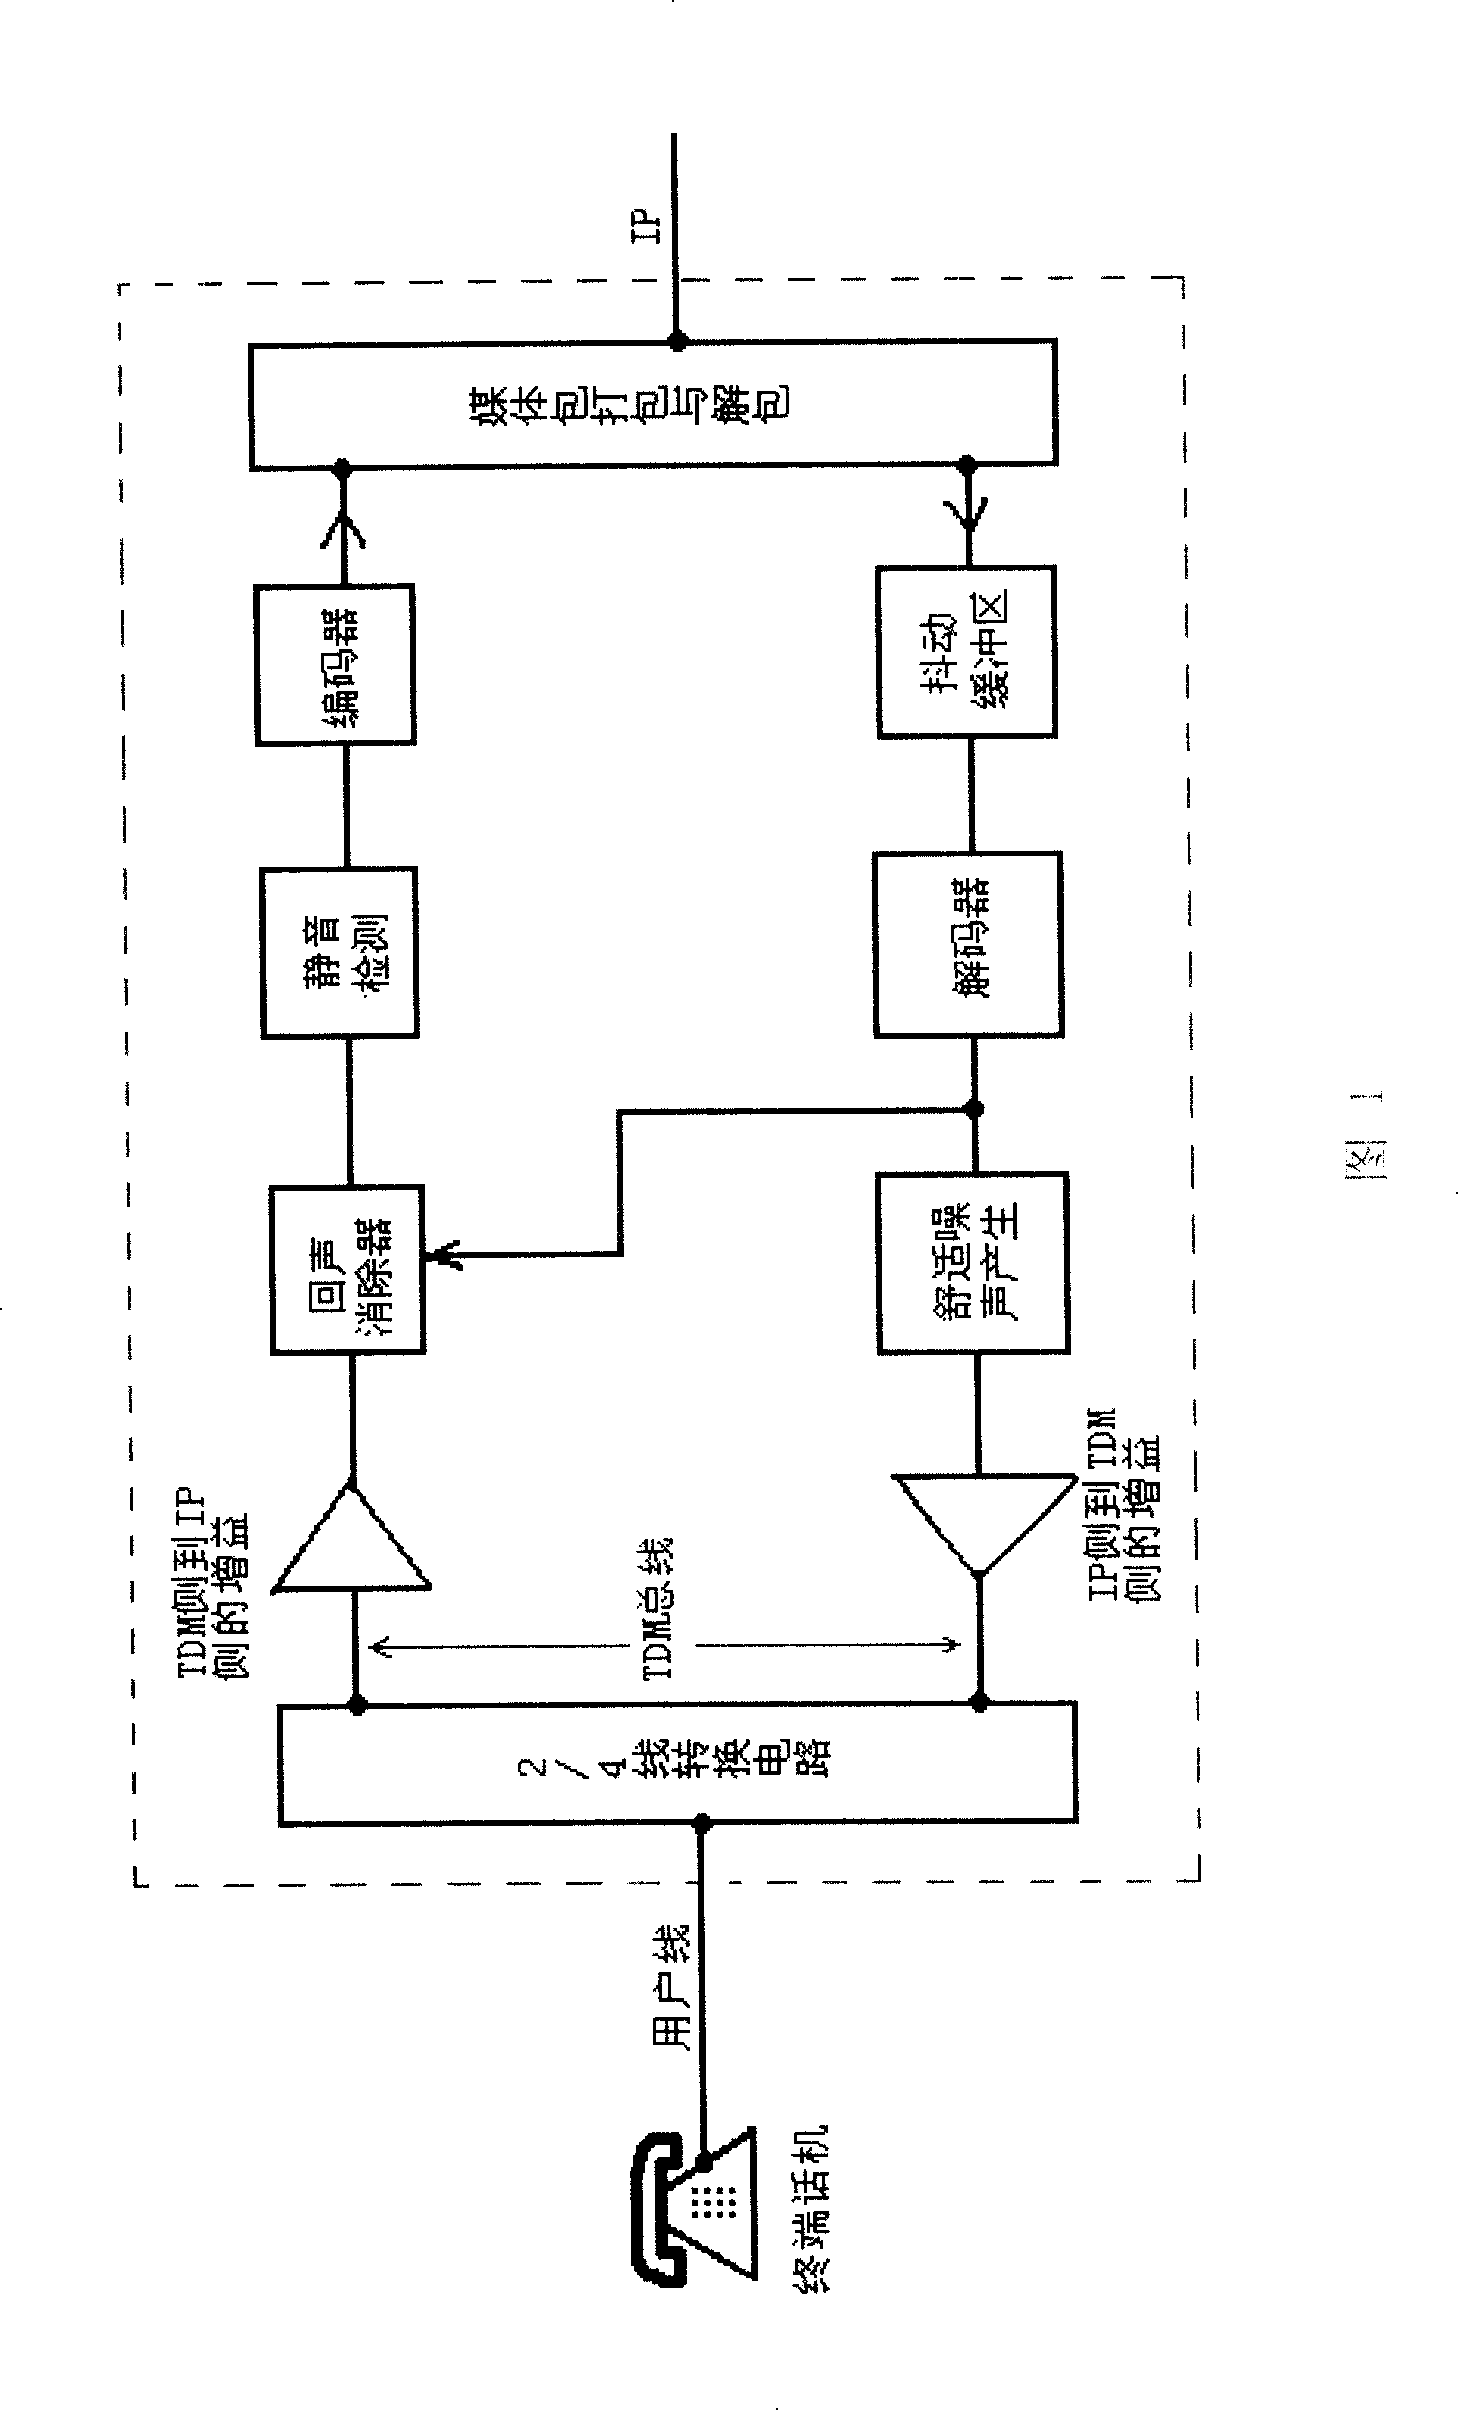 Method for reducing influence caused by echo to subjective perception in VoIP communication